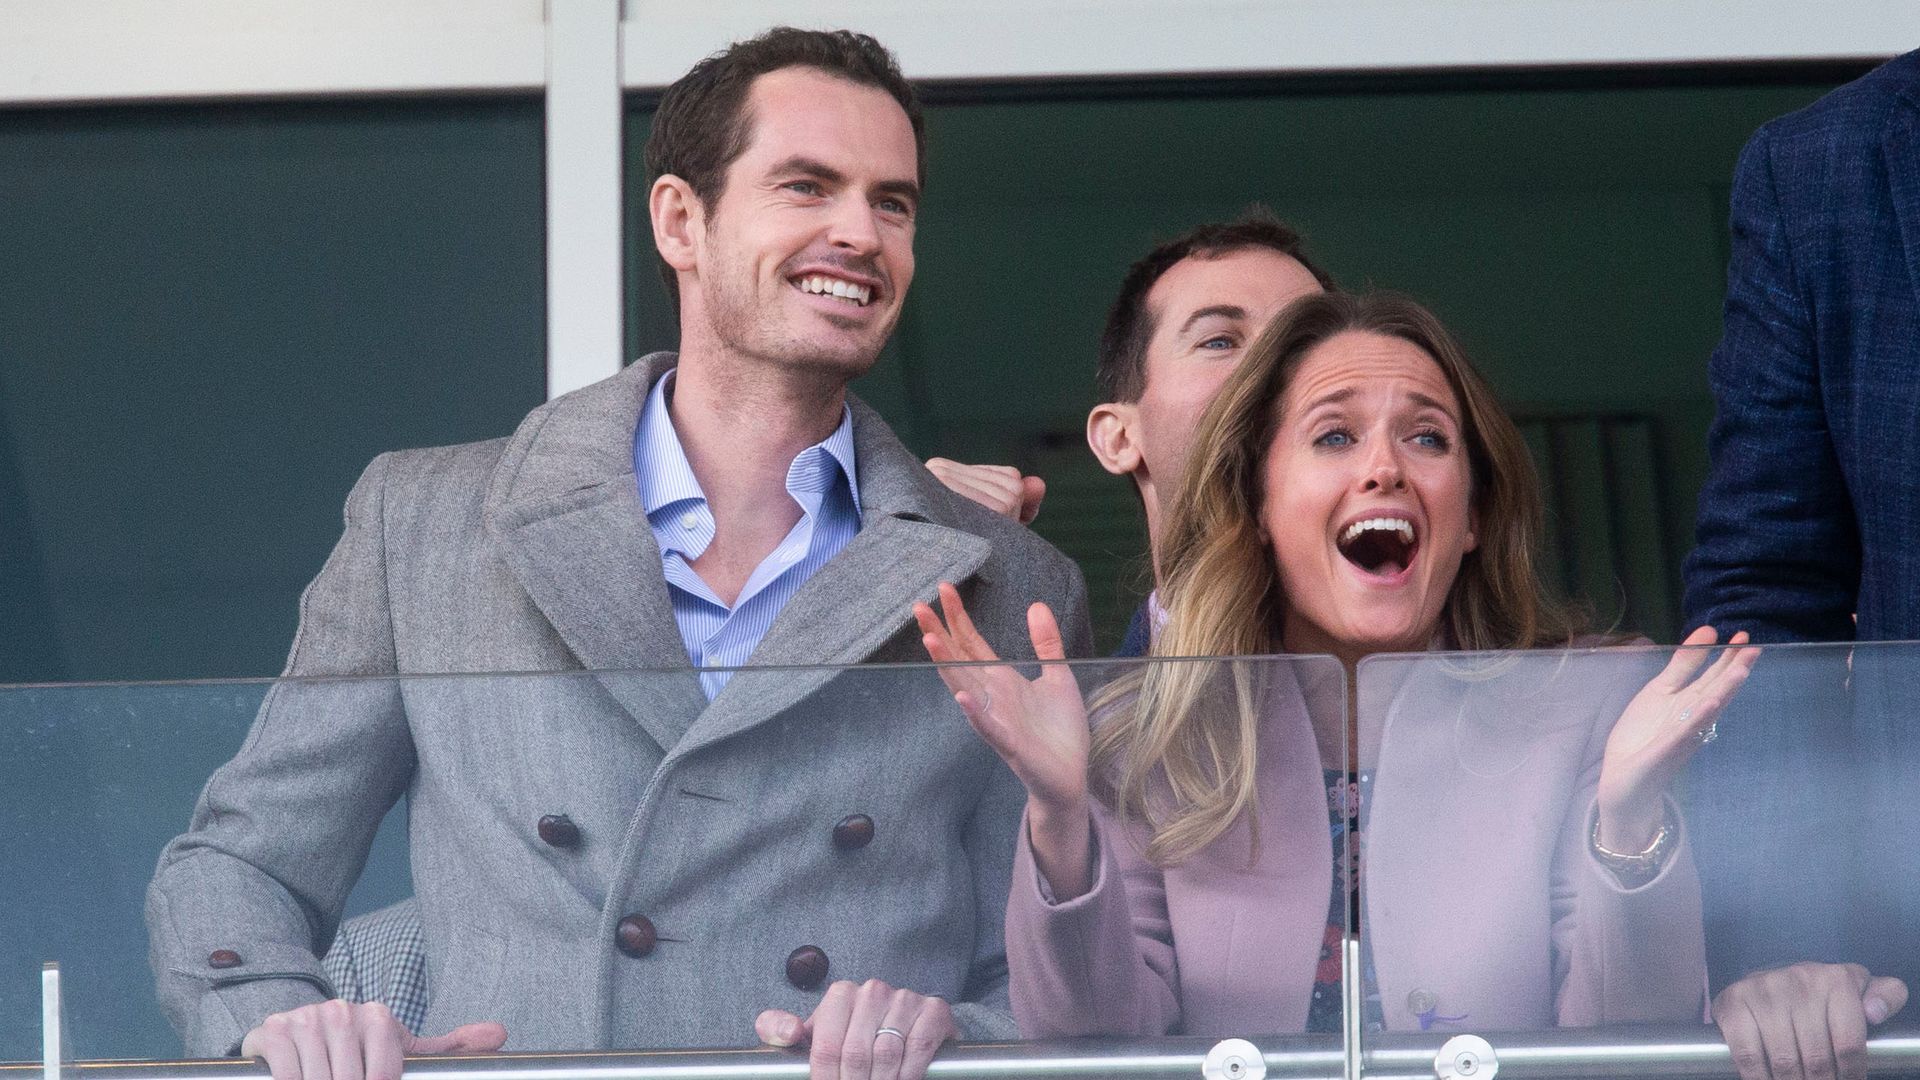 Andy Murray's family: Inside the Wimbledon star's private life with wife and four children